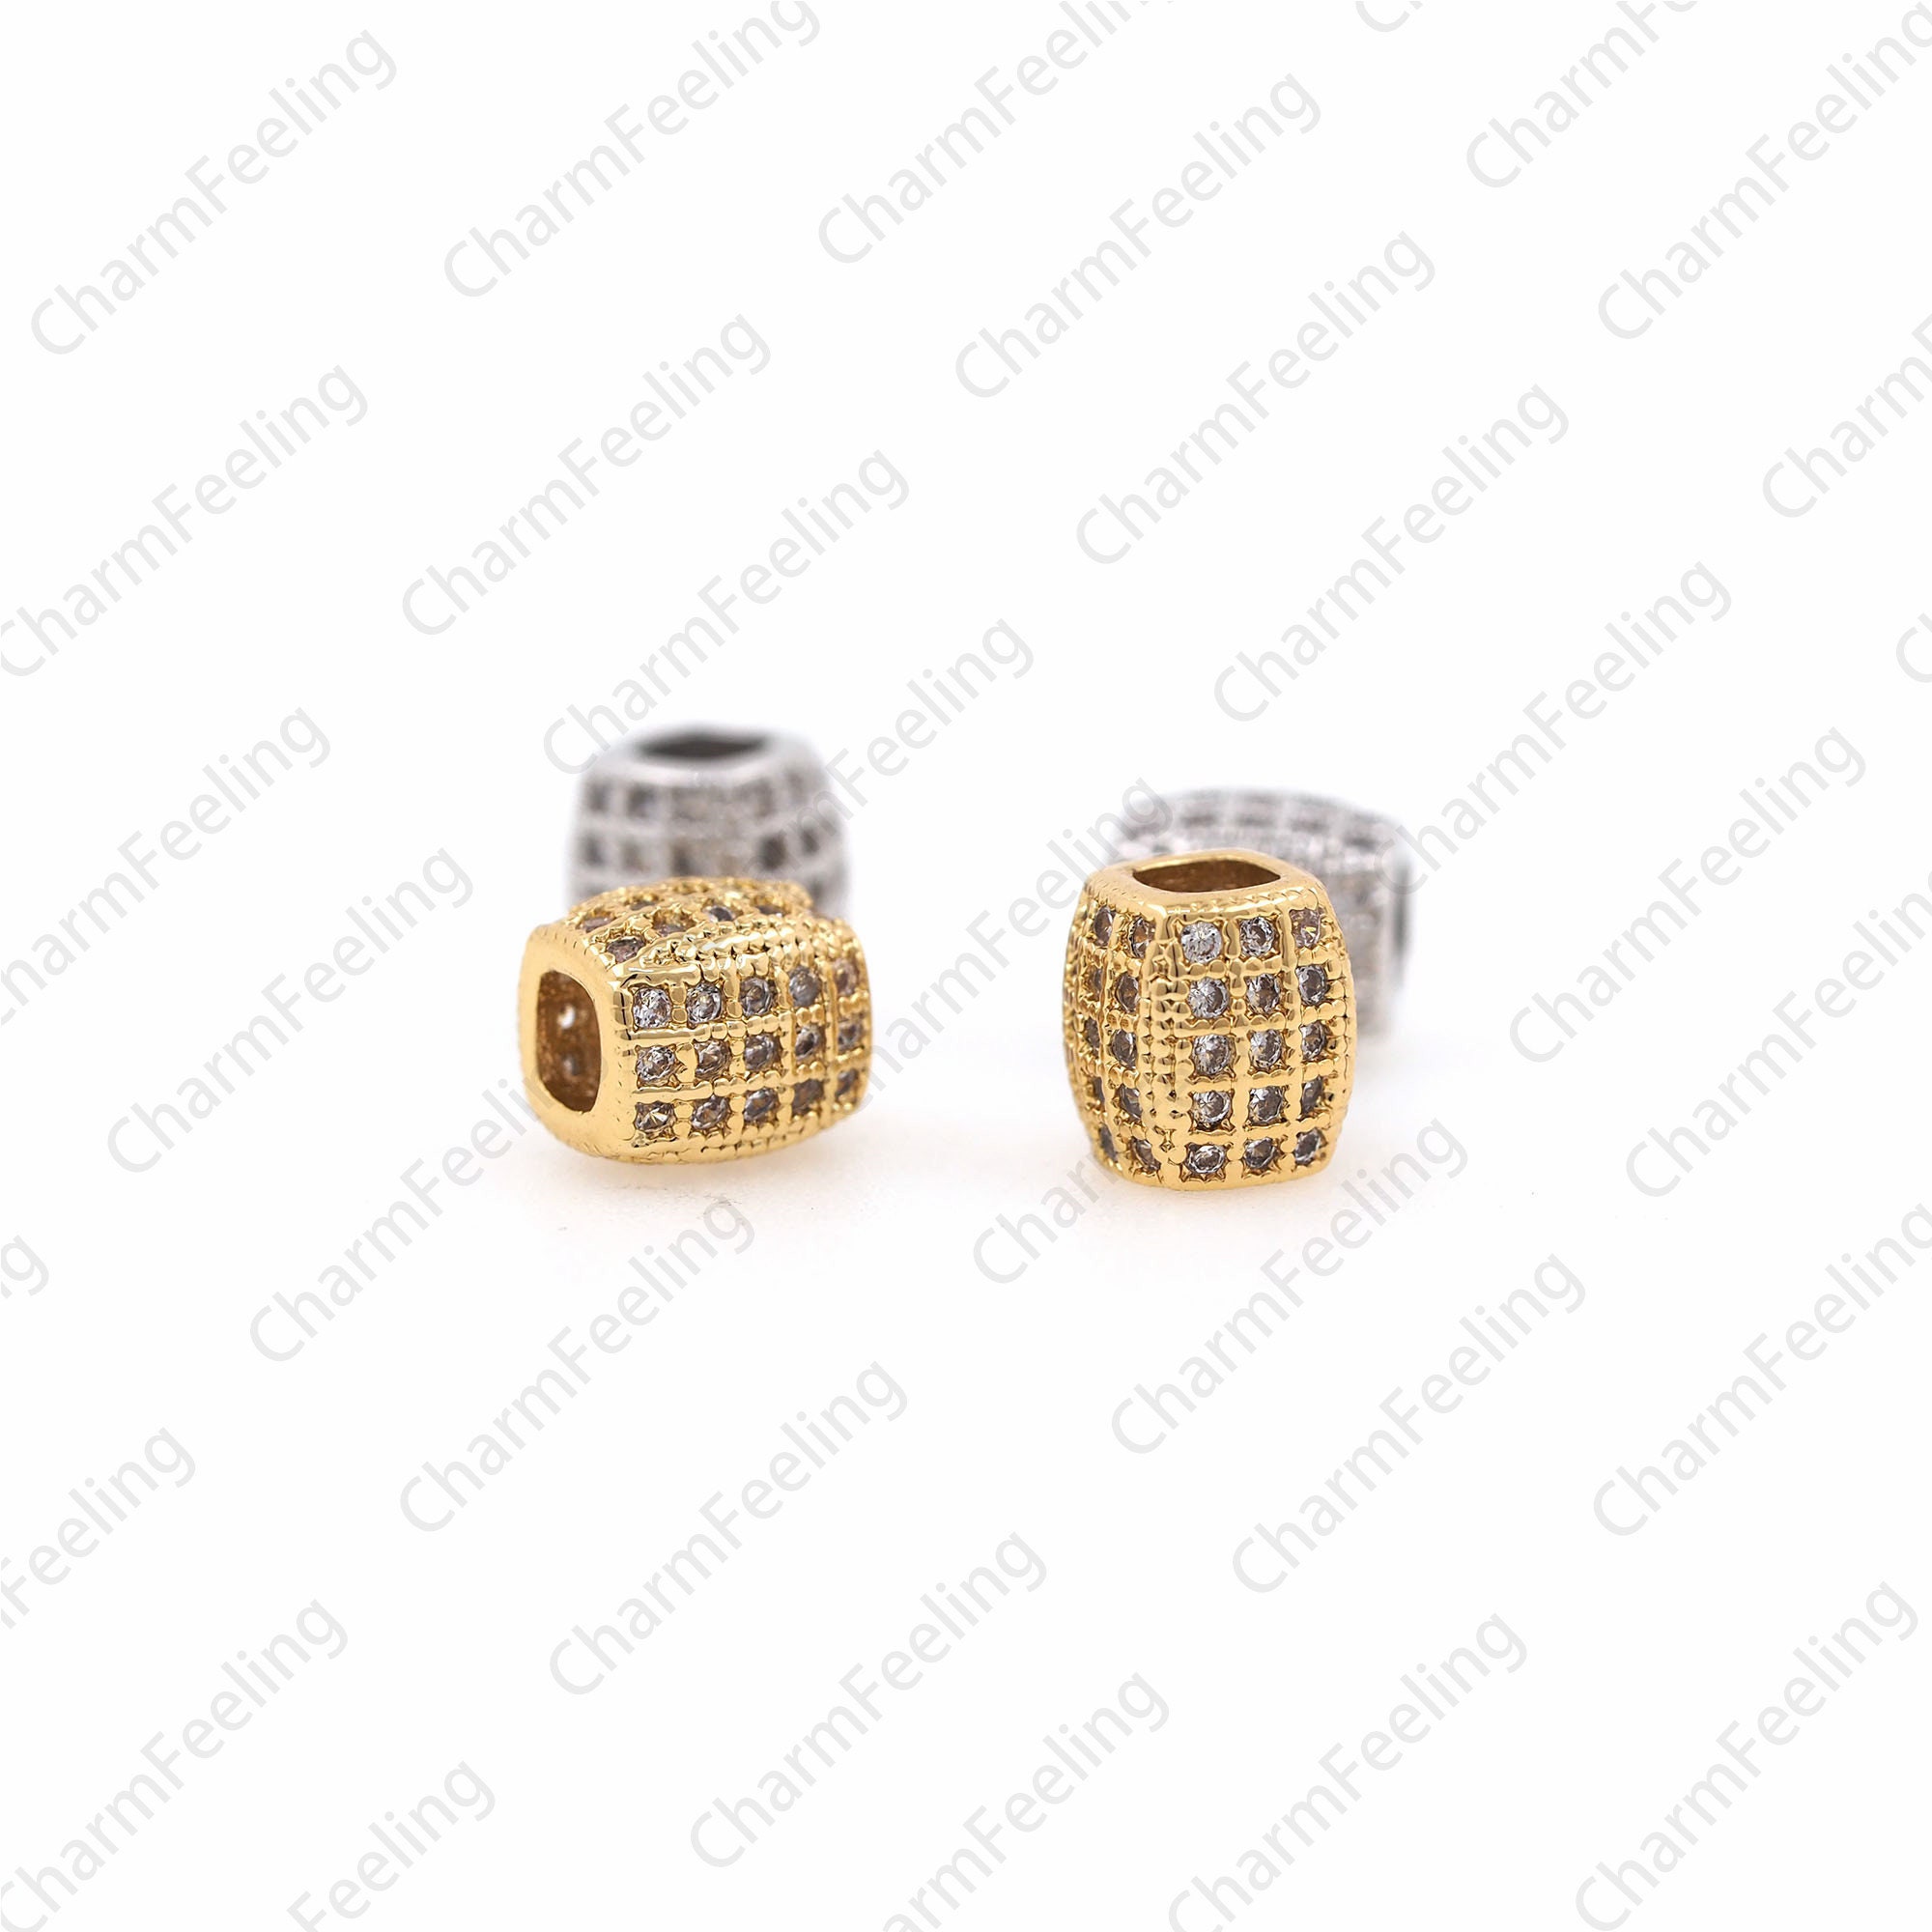 Micro Pave Tube Spacer Beads, Long Barrel Beads, Micro Pave Sliding Beads 6.7 5.9mm Hole 3.4mm 1Pcs